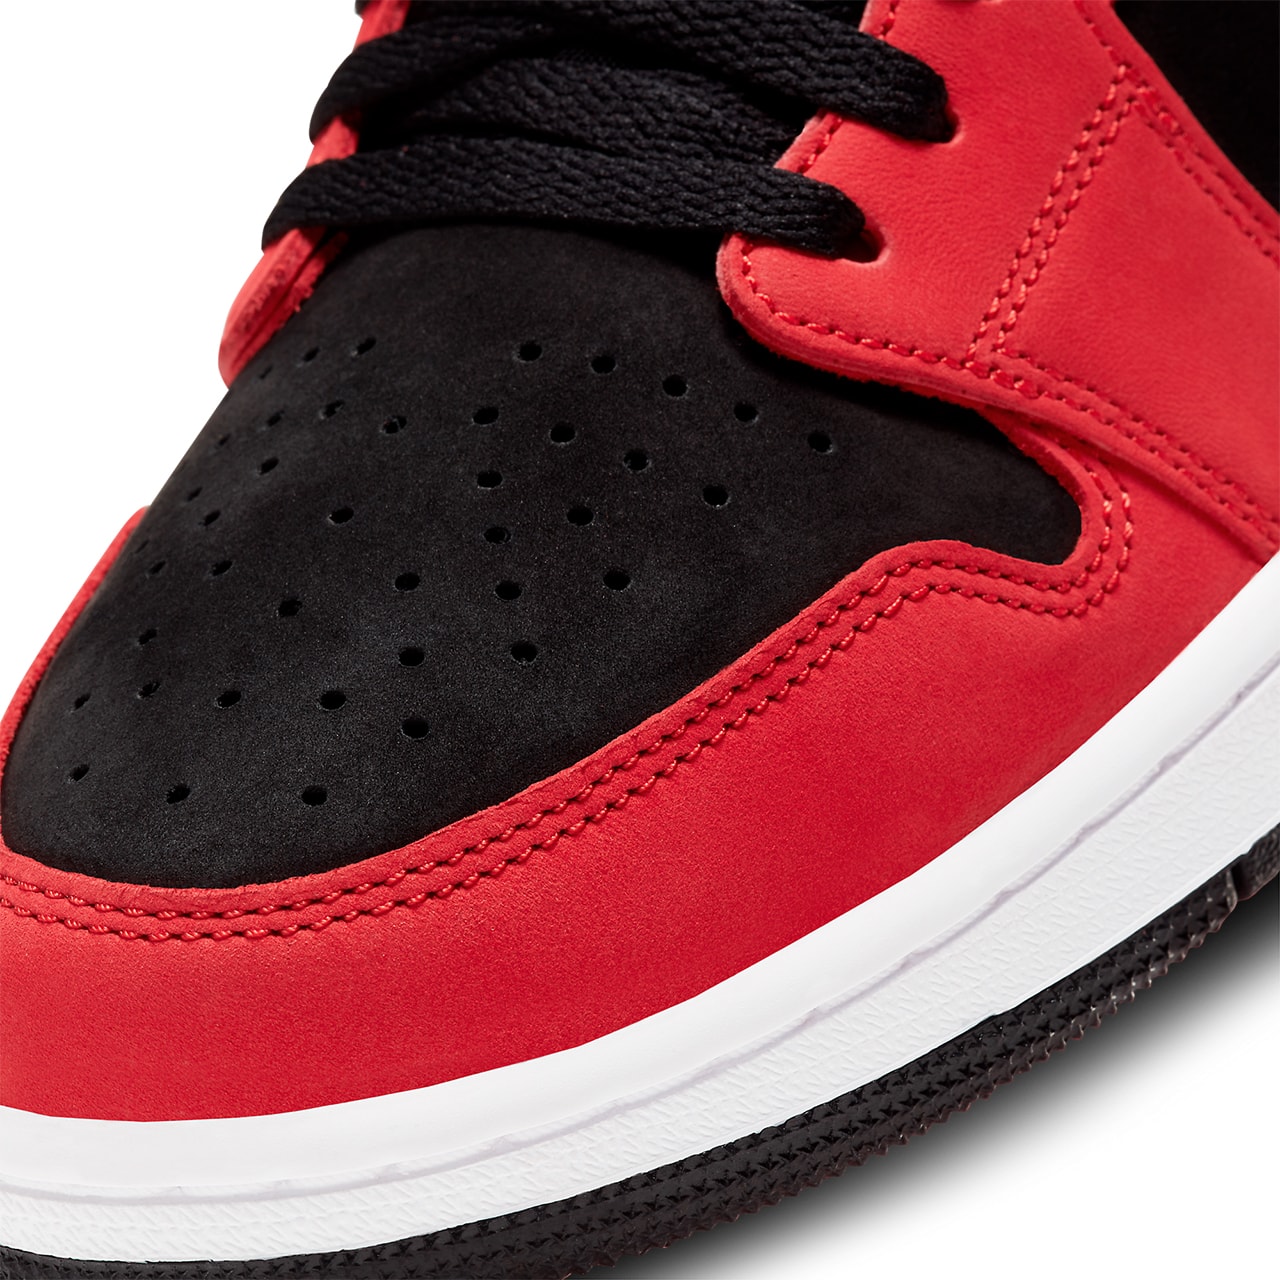 Air Jordan 1 High Zoom Chile Red CT0978-006 Release Date | Hypebeast